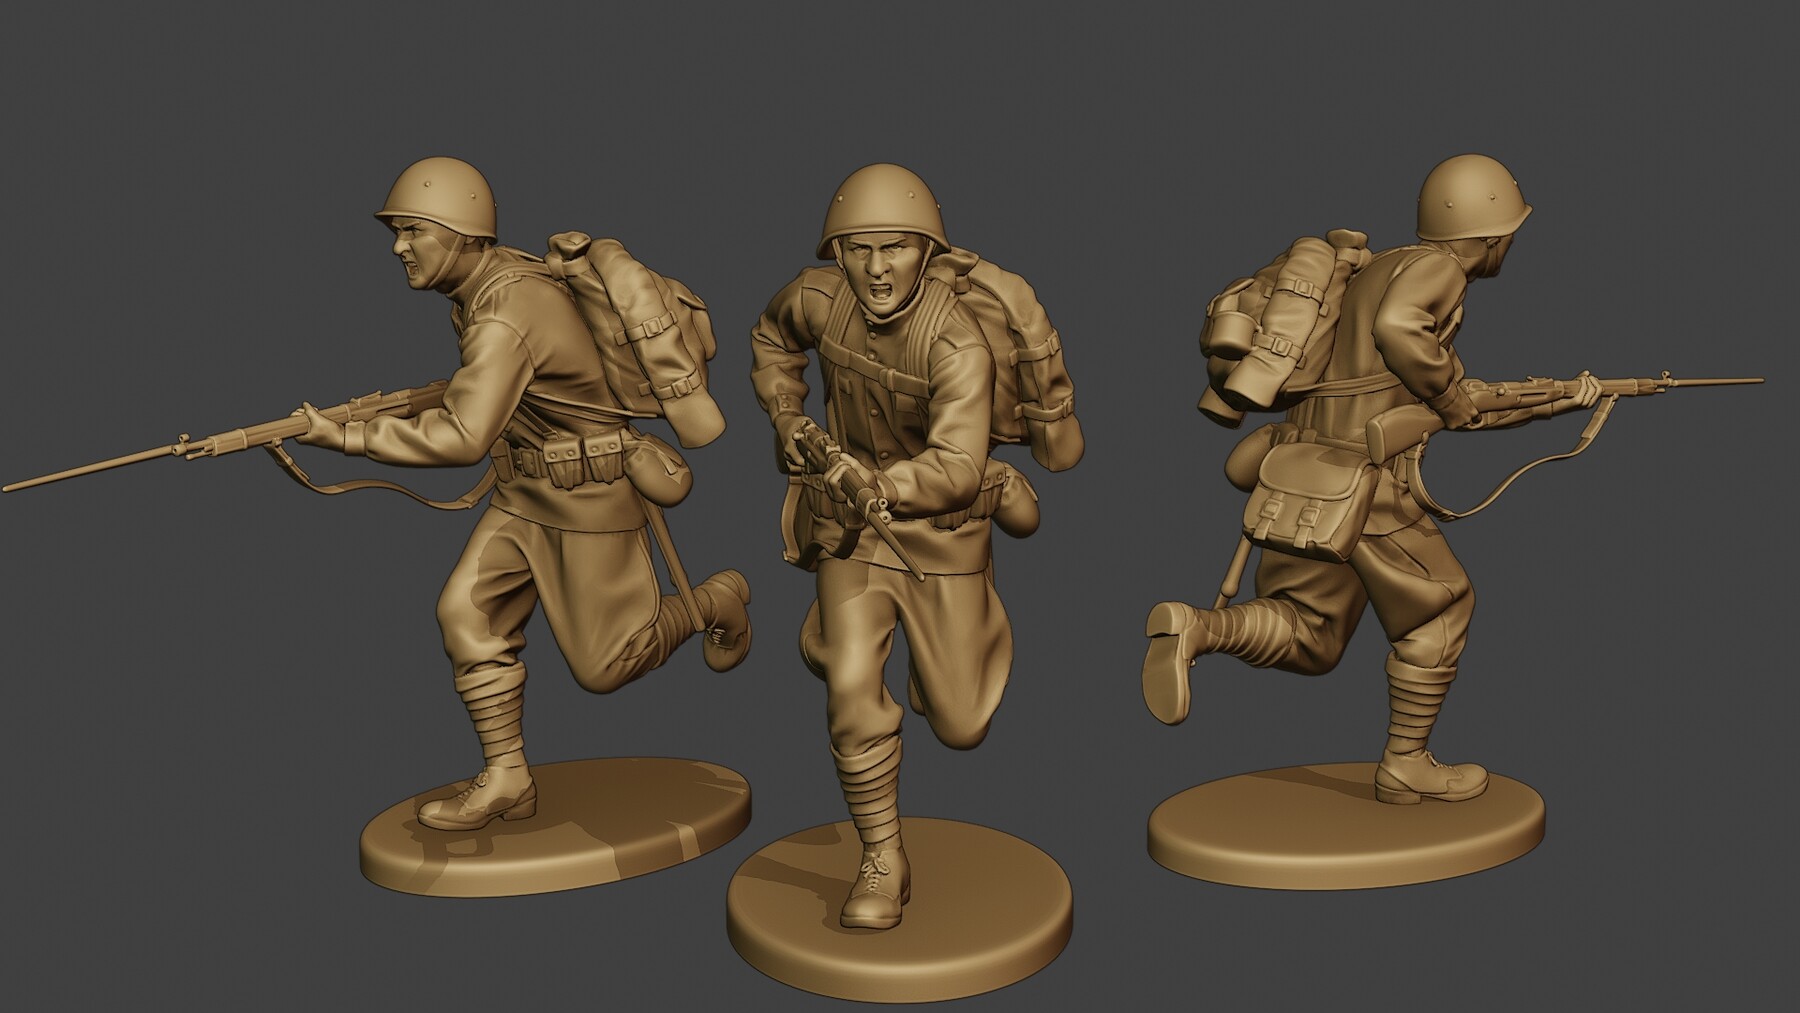 ArtStation - Russian soldiers ww2 R1 Pack 1 | Resources